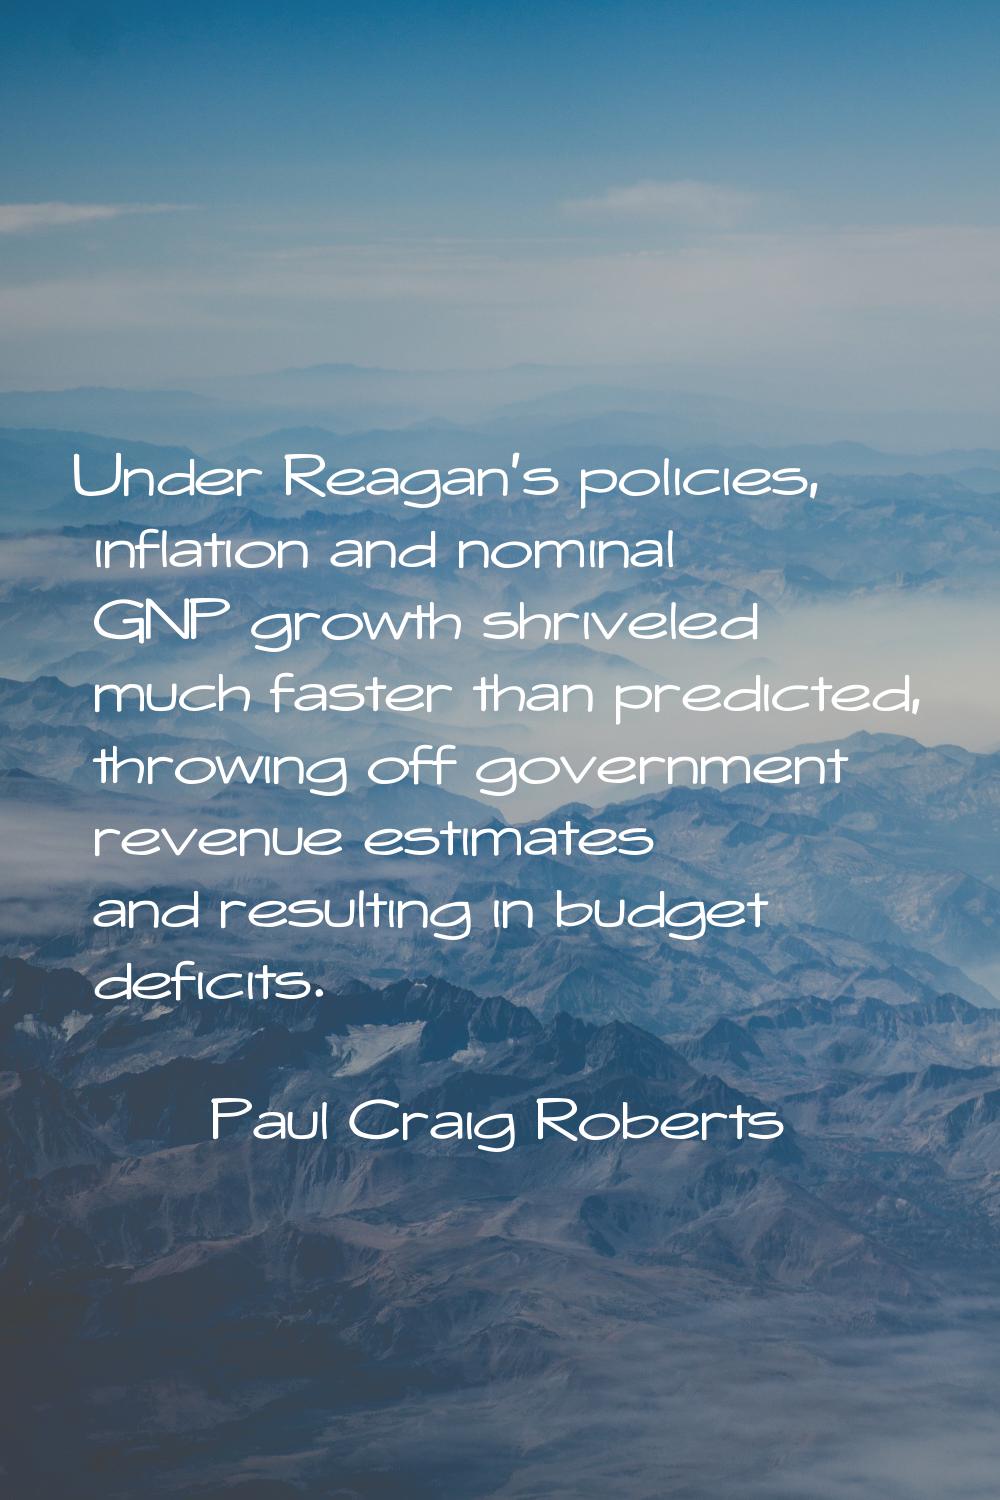 Under Reagan's policies, inflation and nominal GNP growth shriveled much faster than predicted, thr